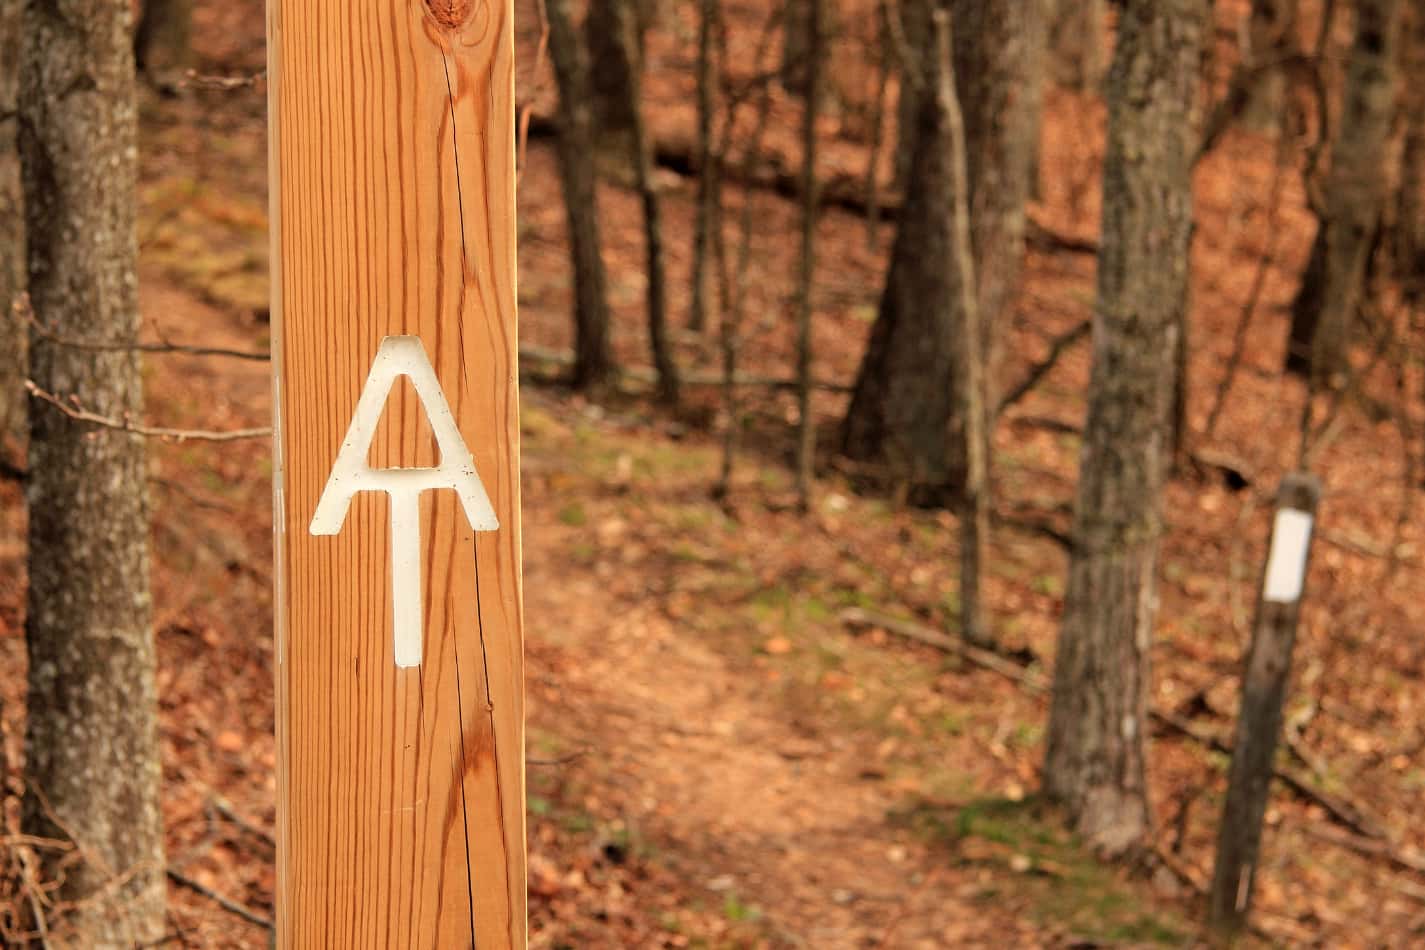 Appalachian Trail Marker on the Trail with the white blaze behind it